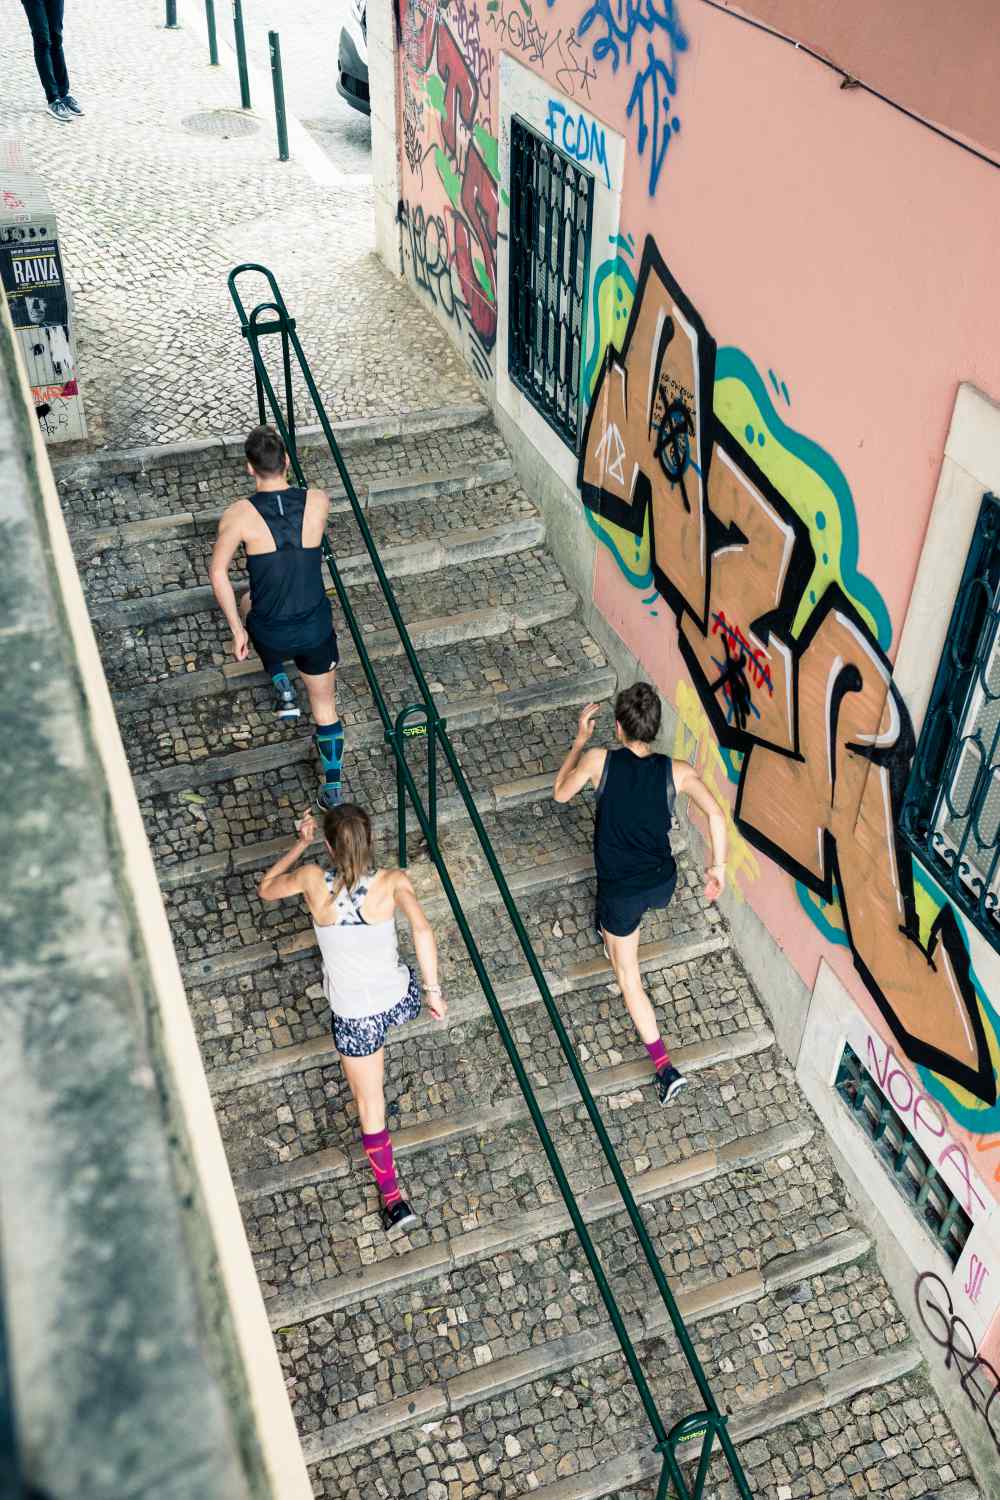 Bird's eye view: A man and two women in running outfits run a staircase in an old town with graffiti on the walls